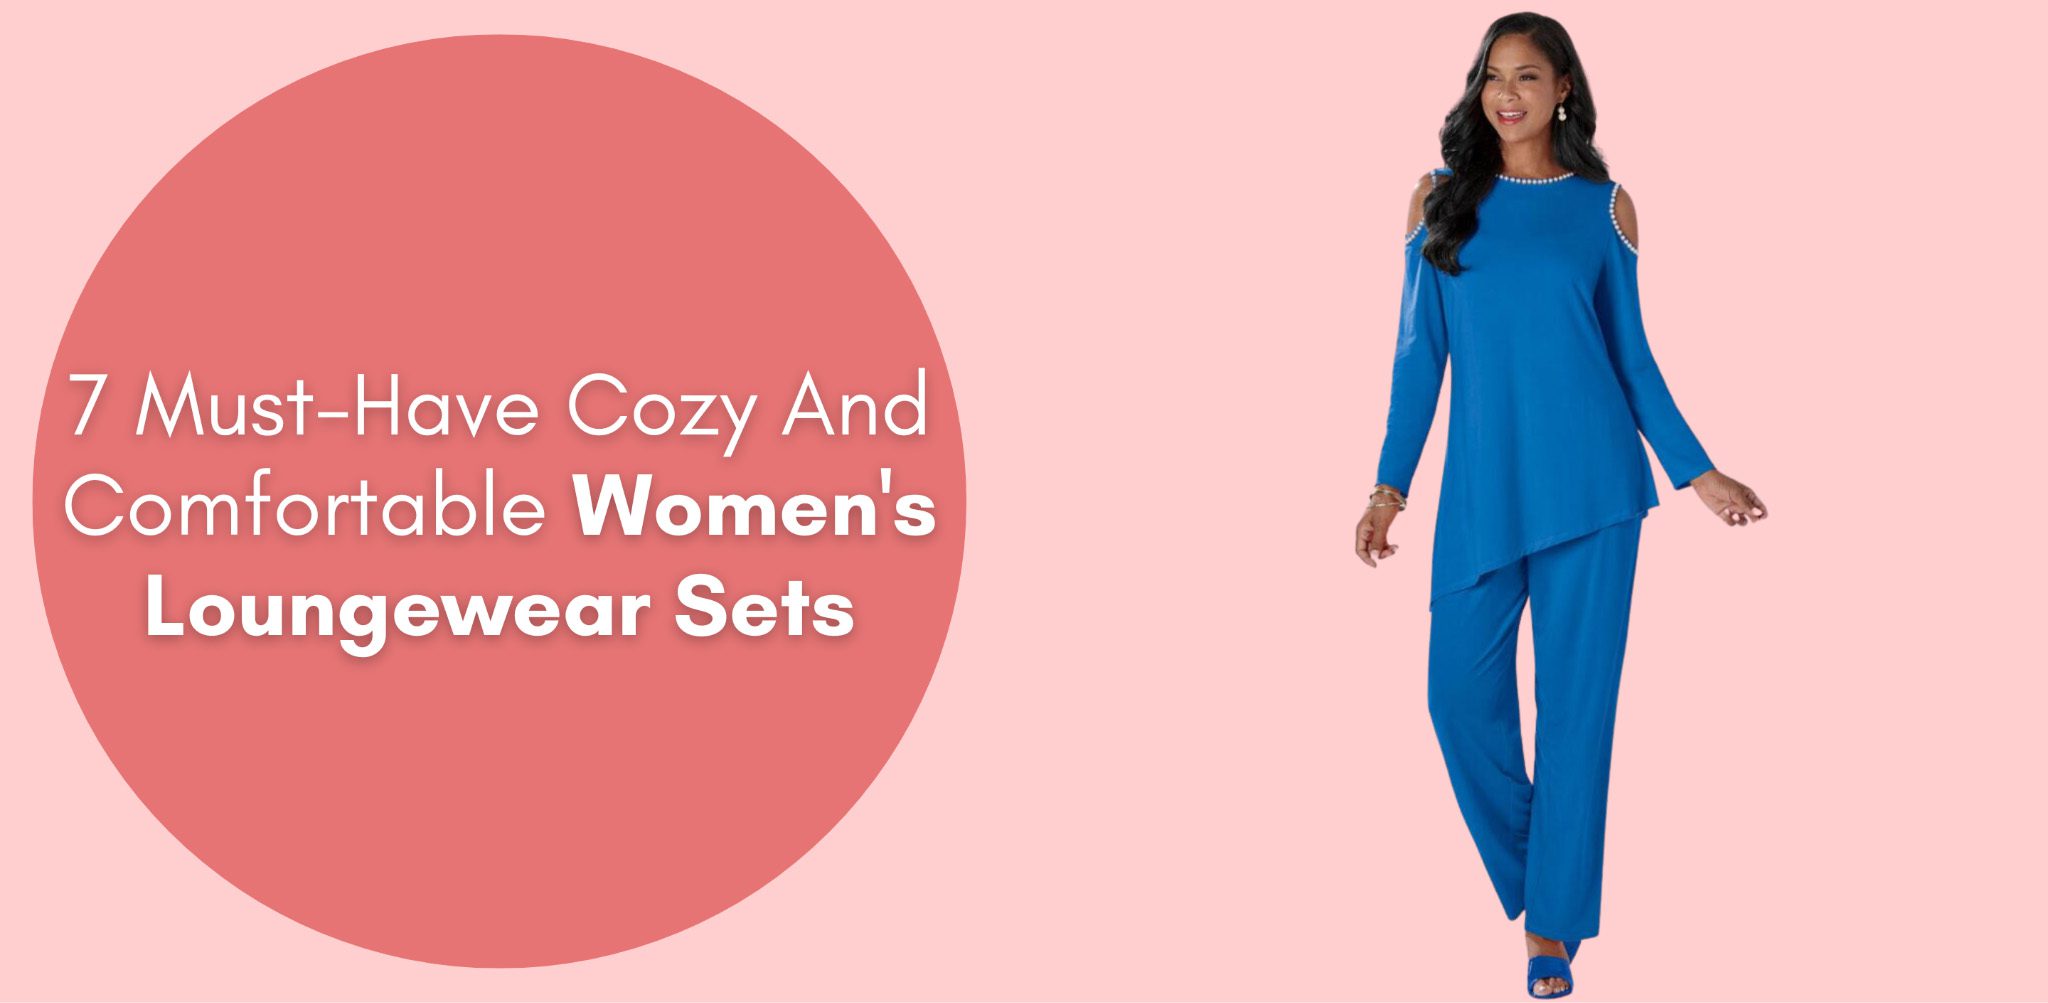 7 Must-Have Cozy And Comfortable Women’s Loungewear Sets